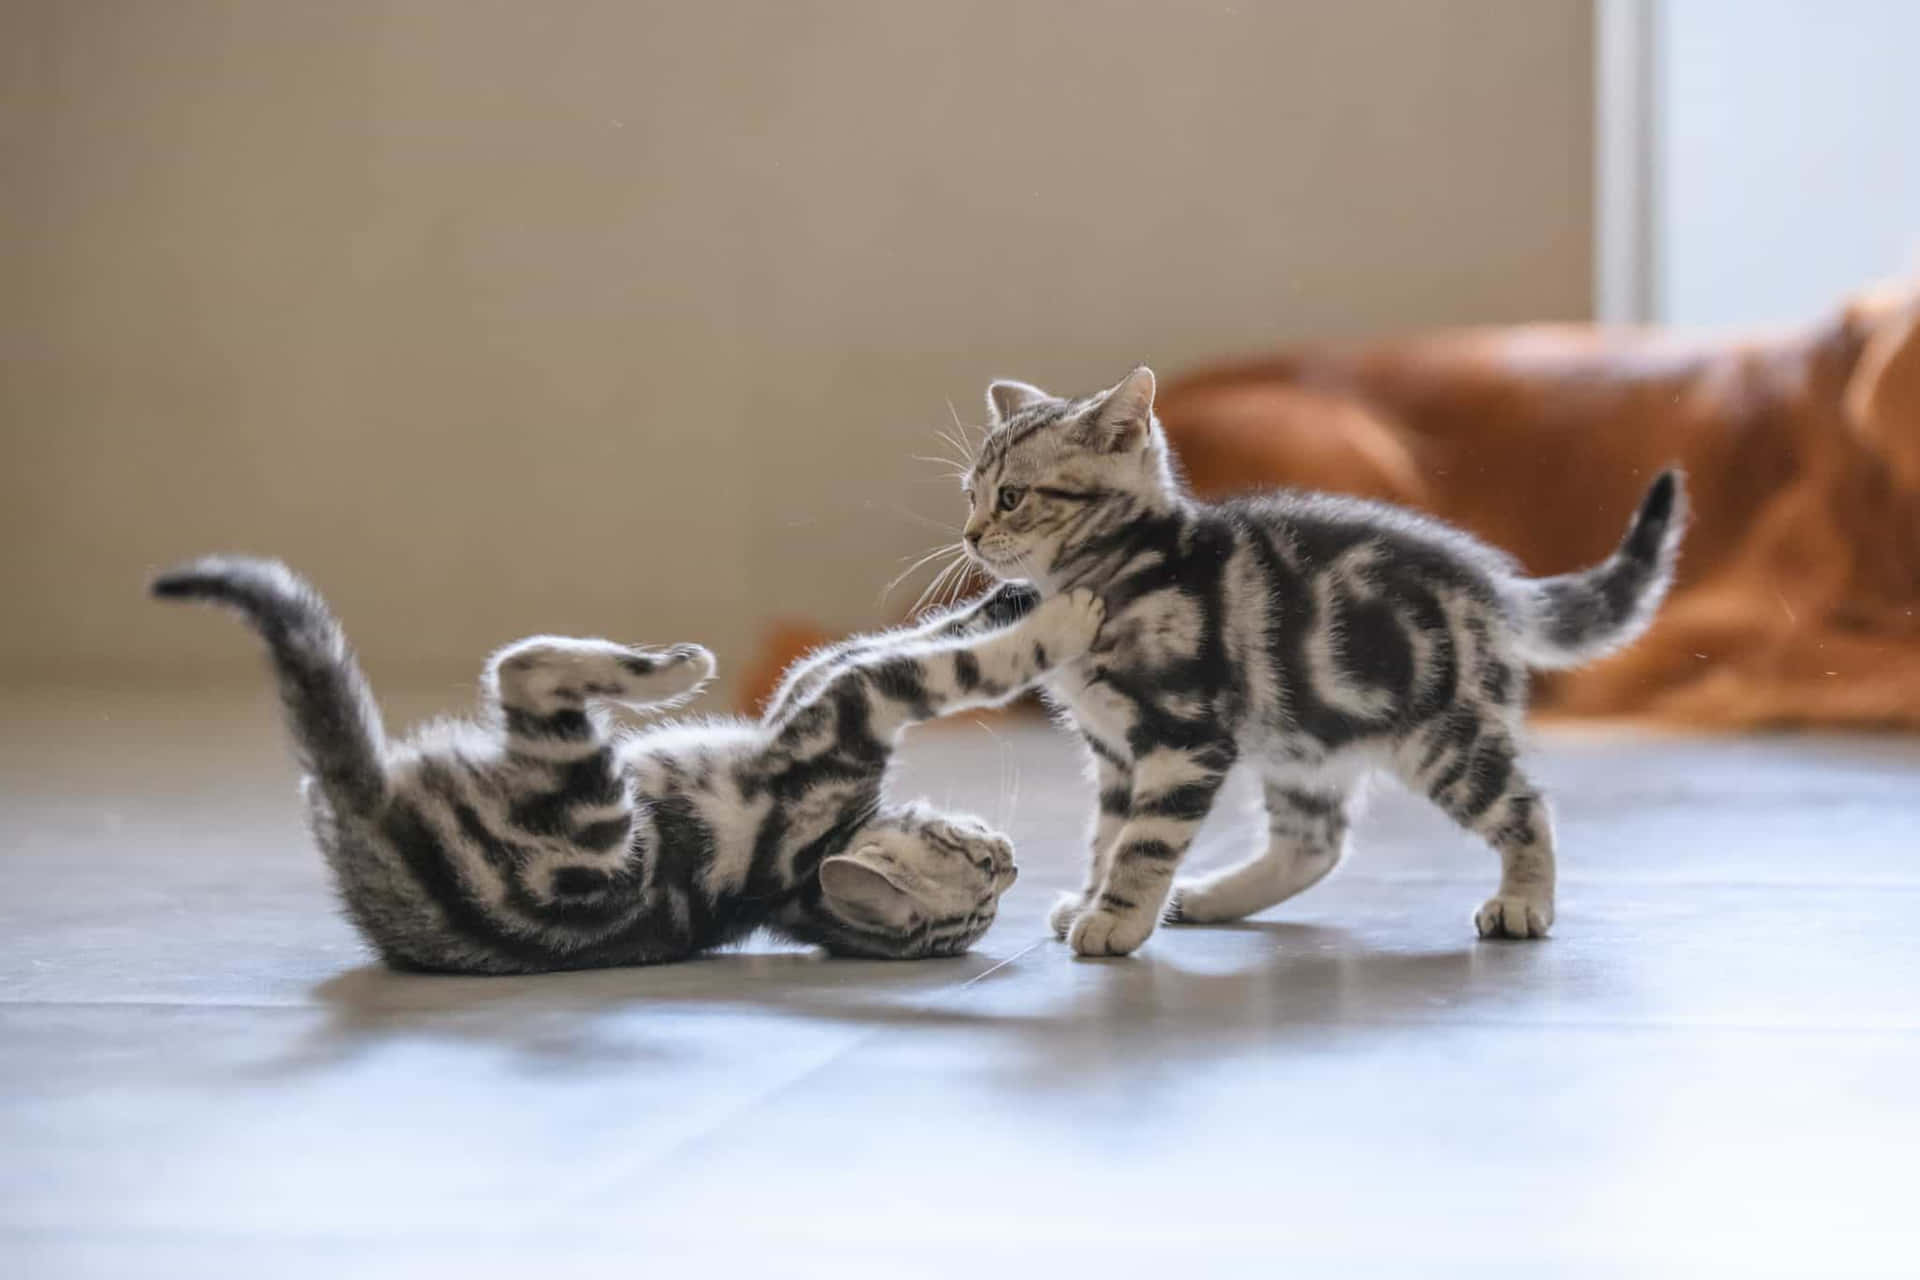 Two Kittens Playing With Each Other On The Floor